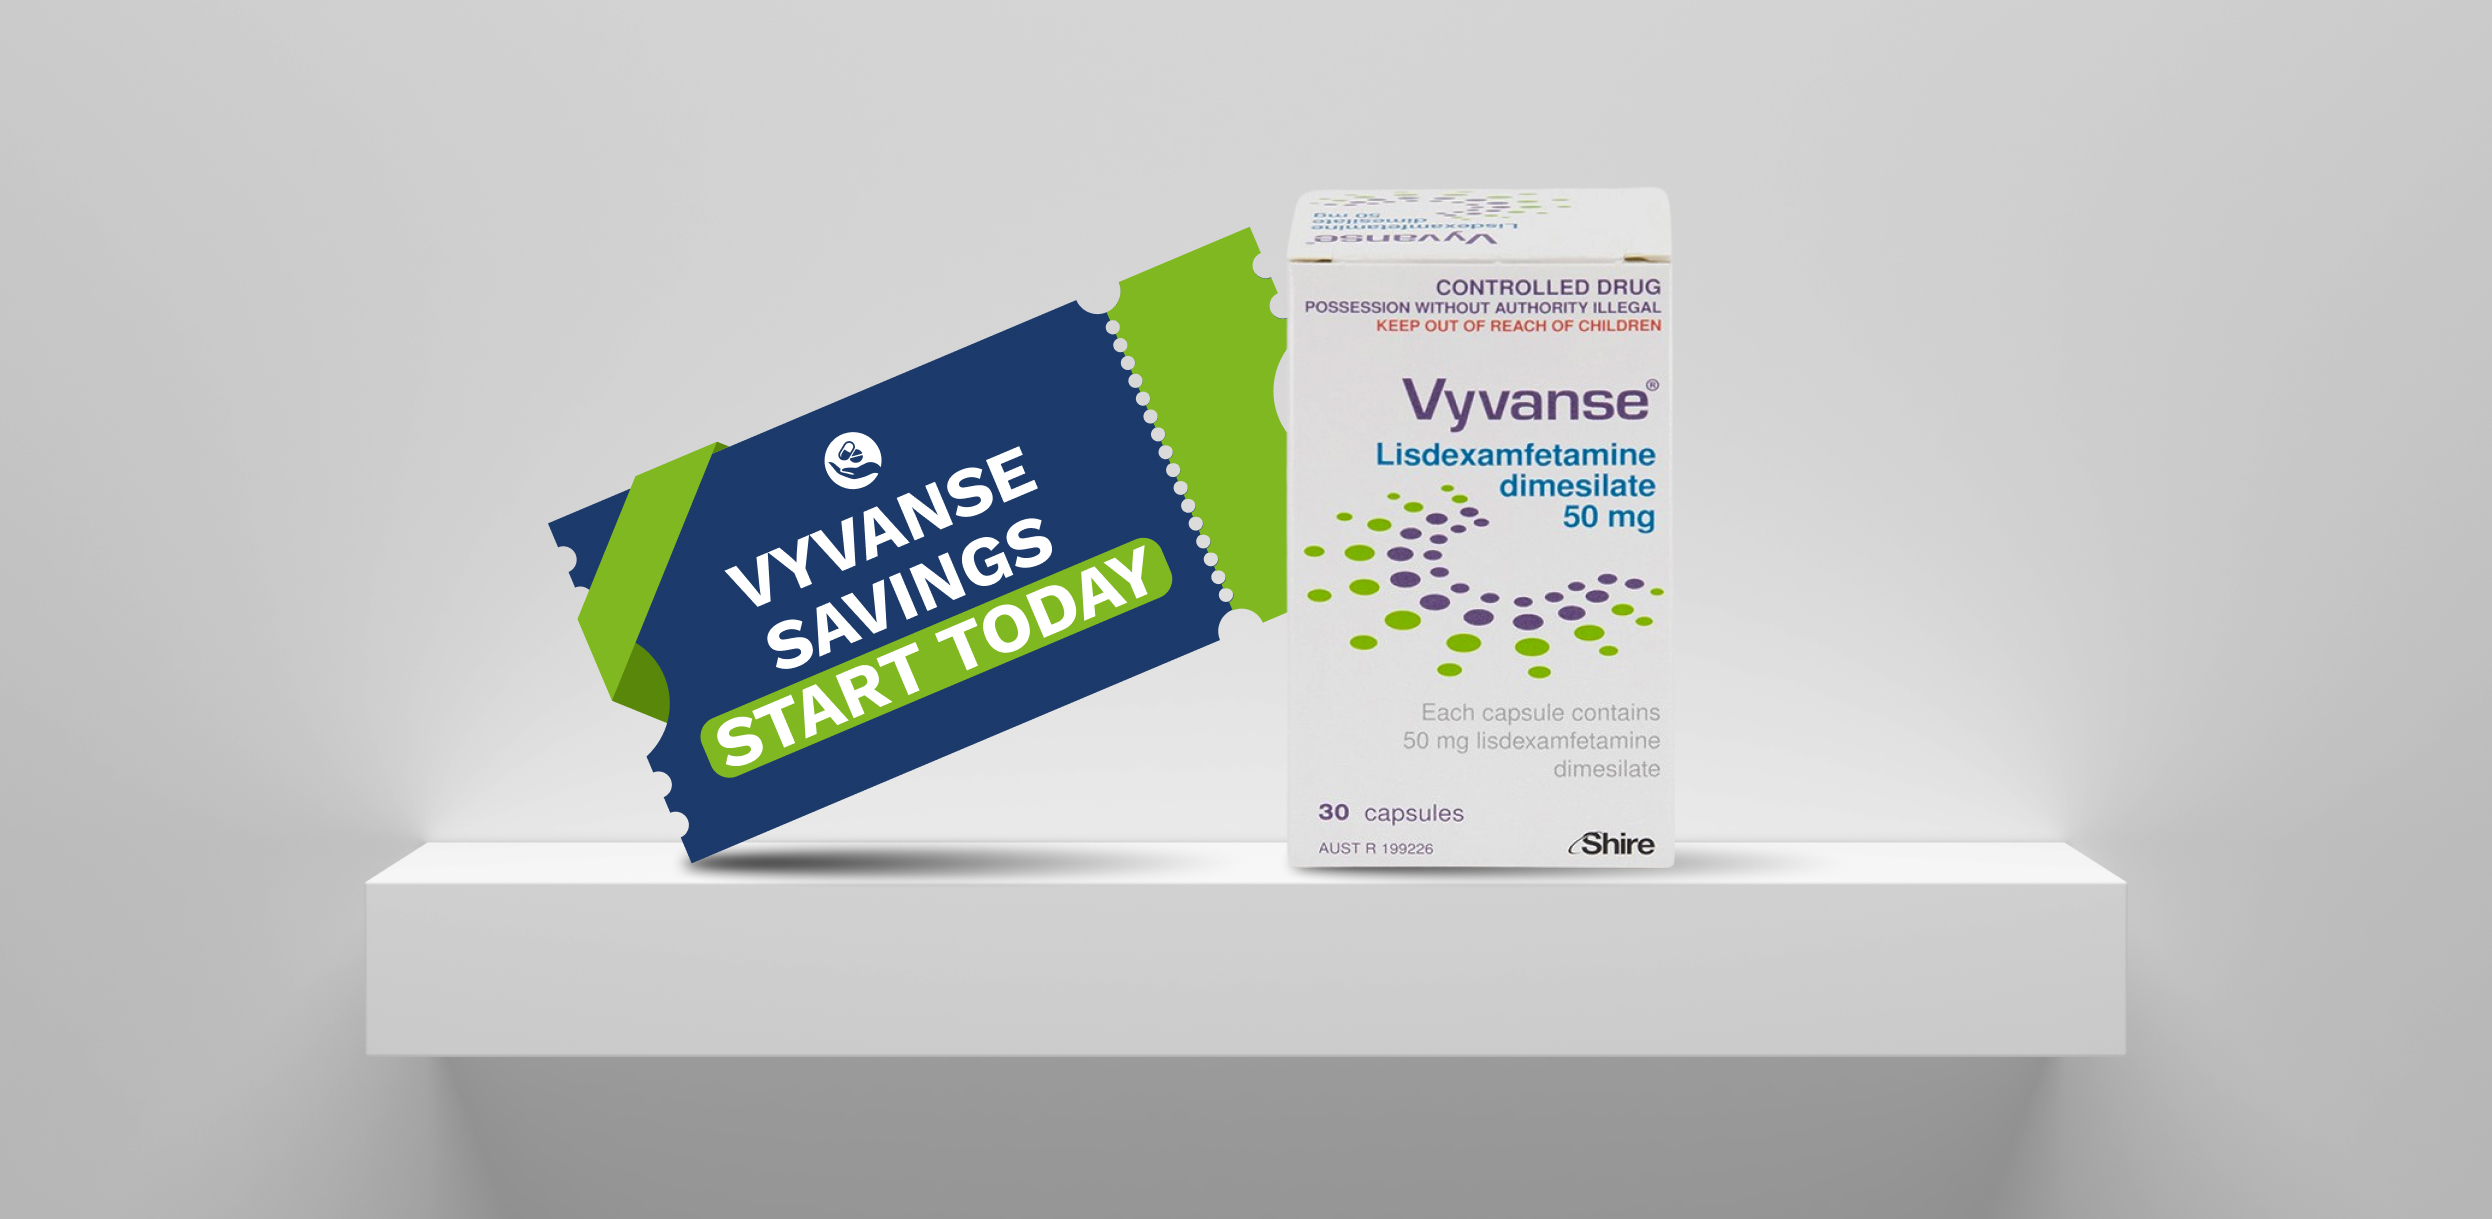 12 Ways to Save on Your Vyvanse Prescription